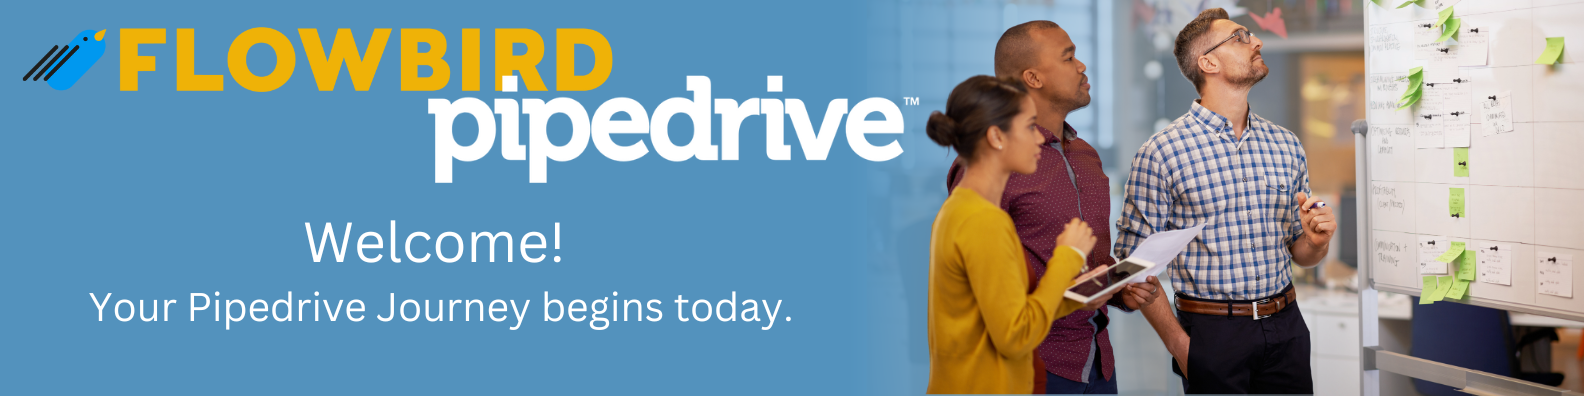 Welcome! Your Pipedrive Journey begins today!-2